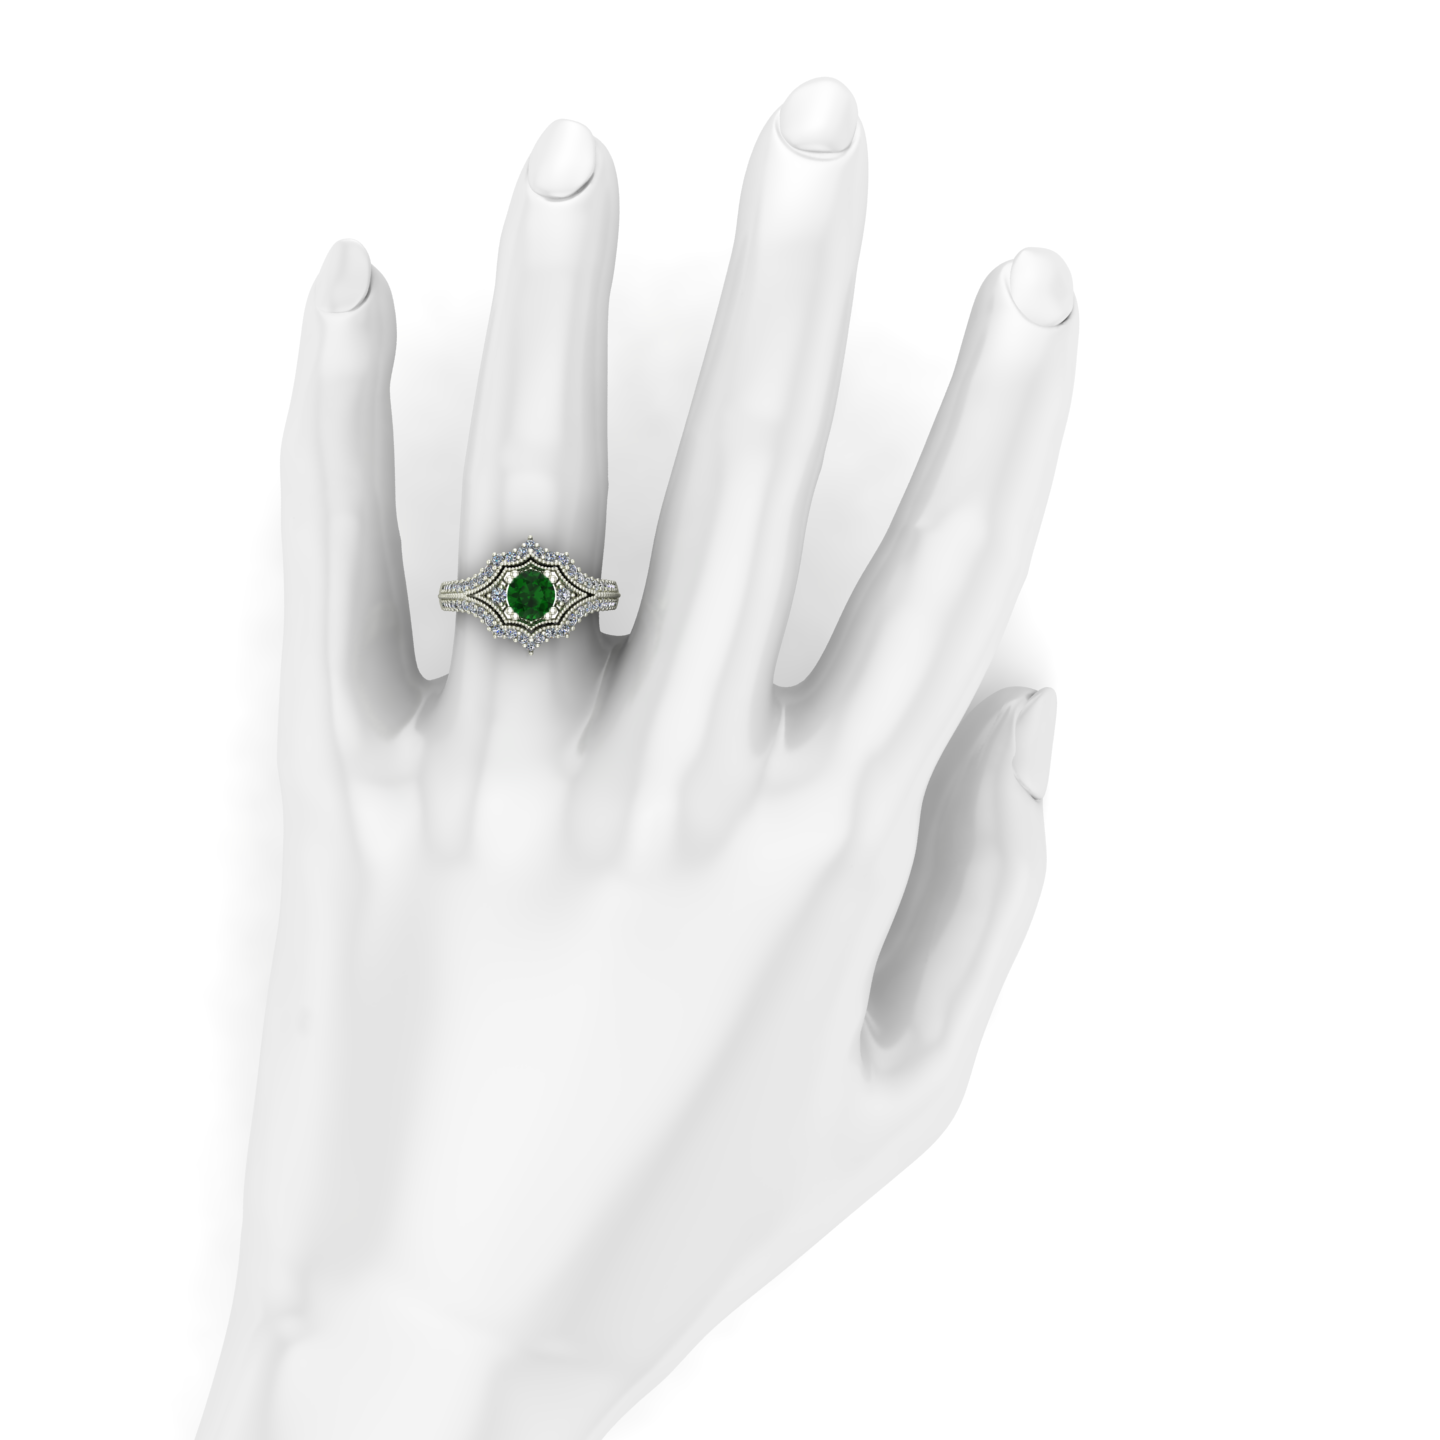 Emerald and diamond ring with floral carving in 14k white gold - Charles Babb Designs - on hand